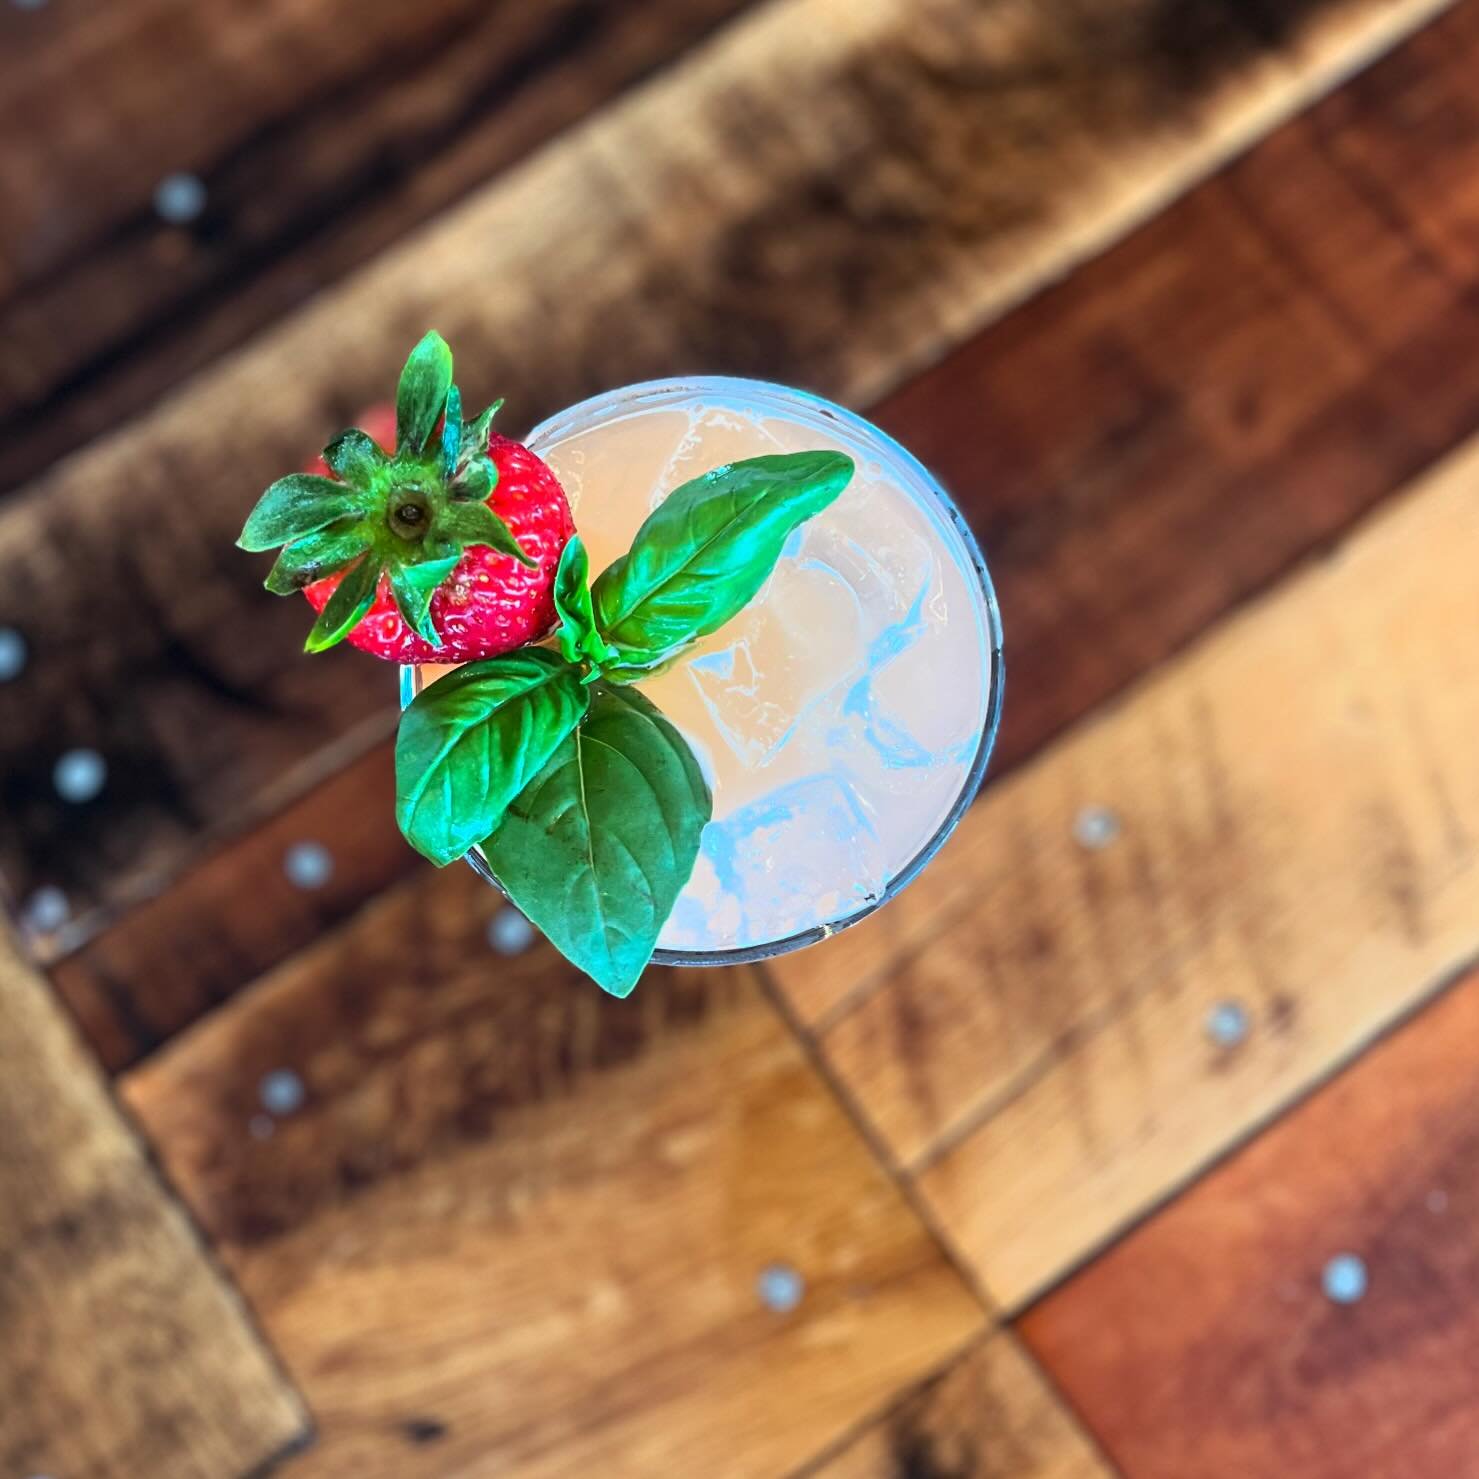 Taste of summer!  This delicious strawberry basil margarita is the perfect balance of sweet and tart! 🍓

#HamptonsDining #SummerDrinks #MargaritaTime